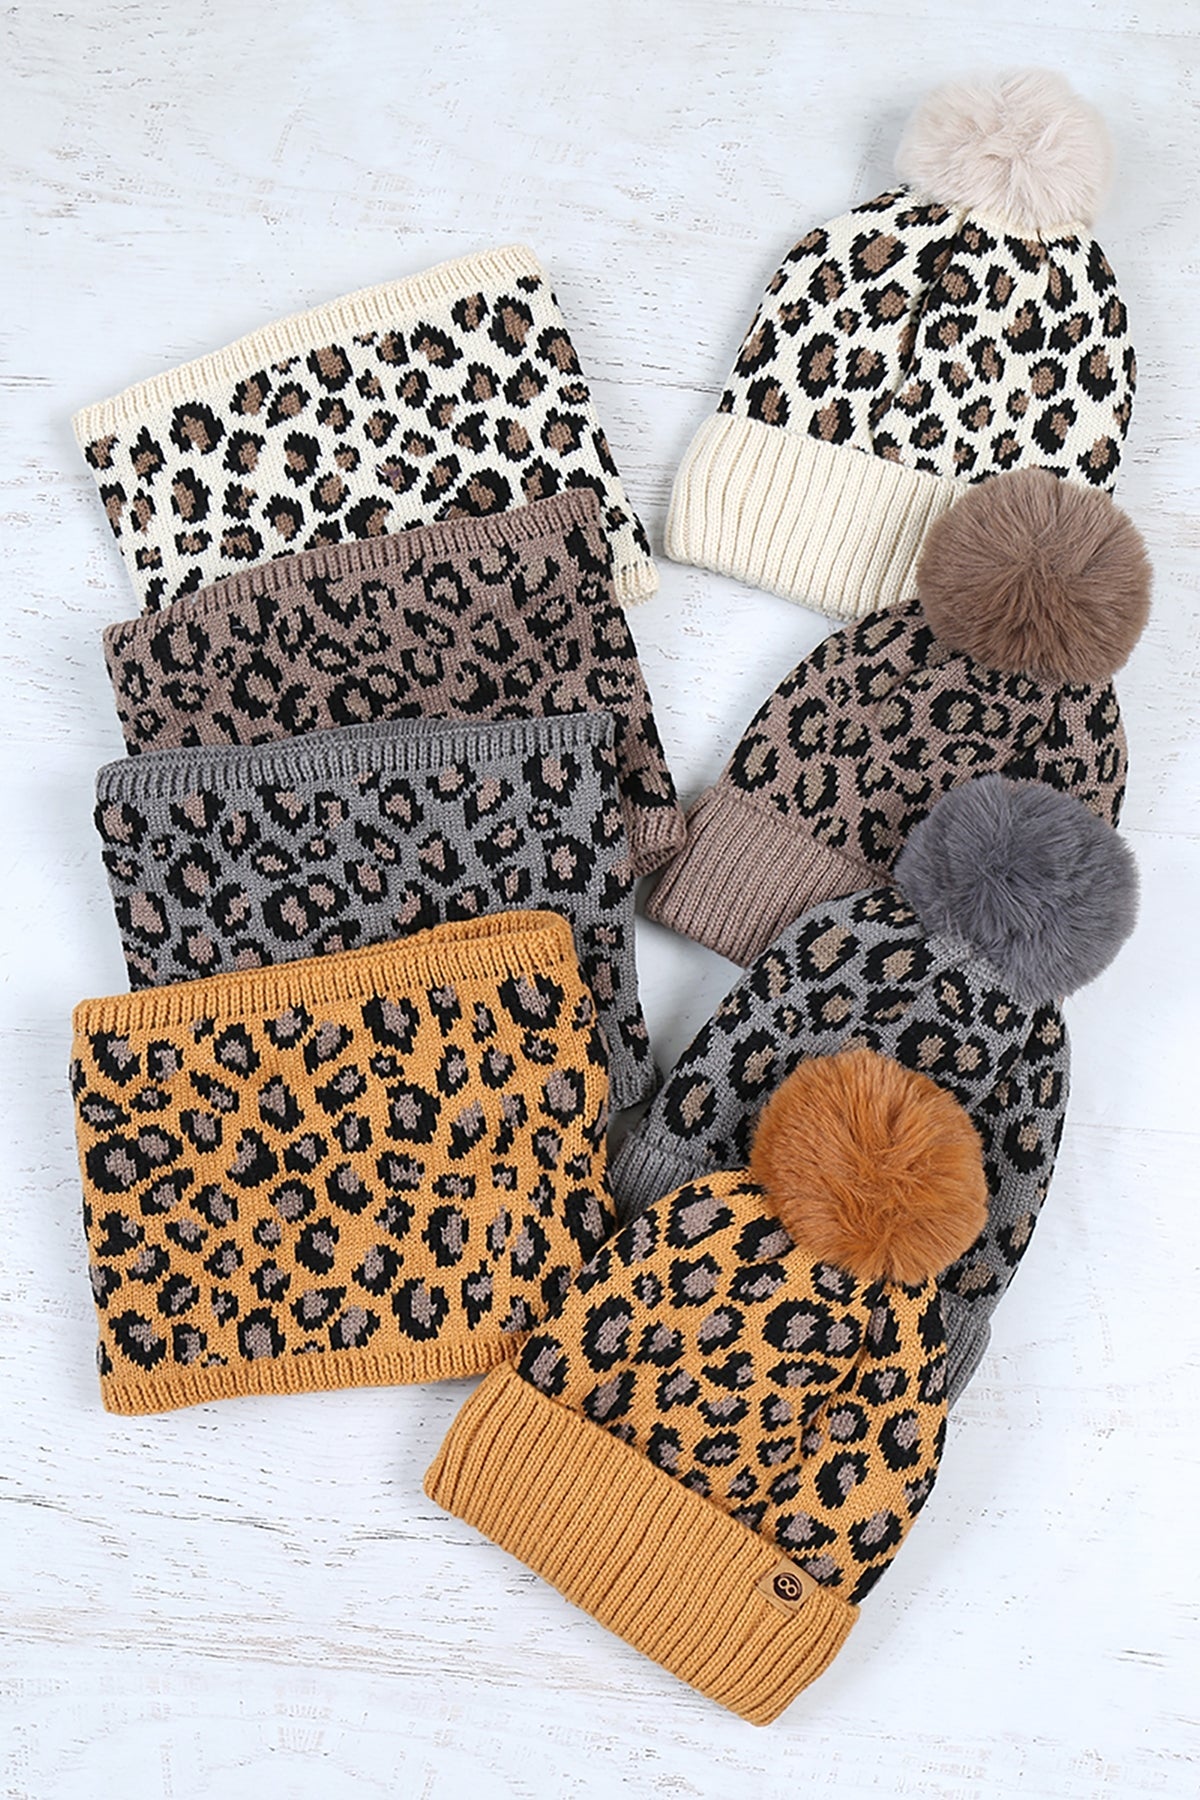 S29-1-1-WSHT-409-FLEECE LINED LEOPARD BEANIE WITH INFINITY SCARF 4 ASSORTED COLORS/12PCS